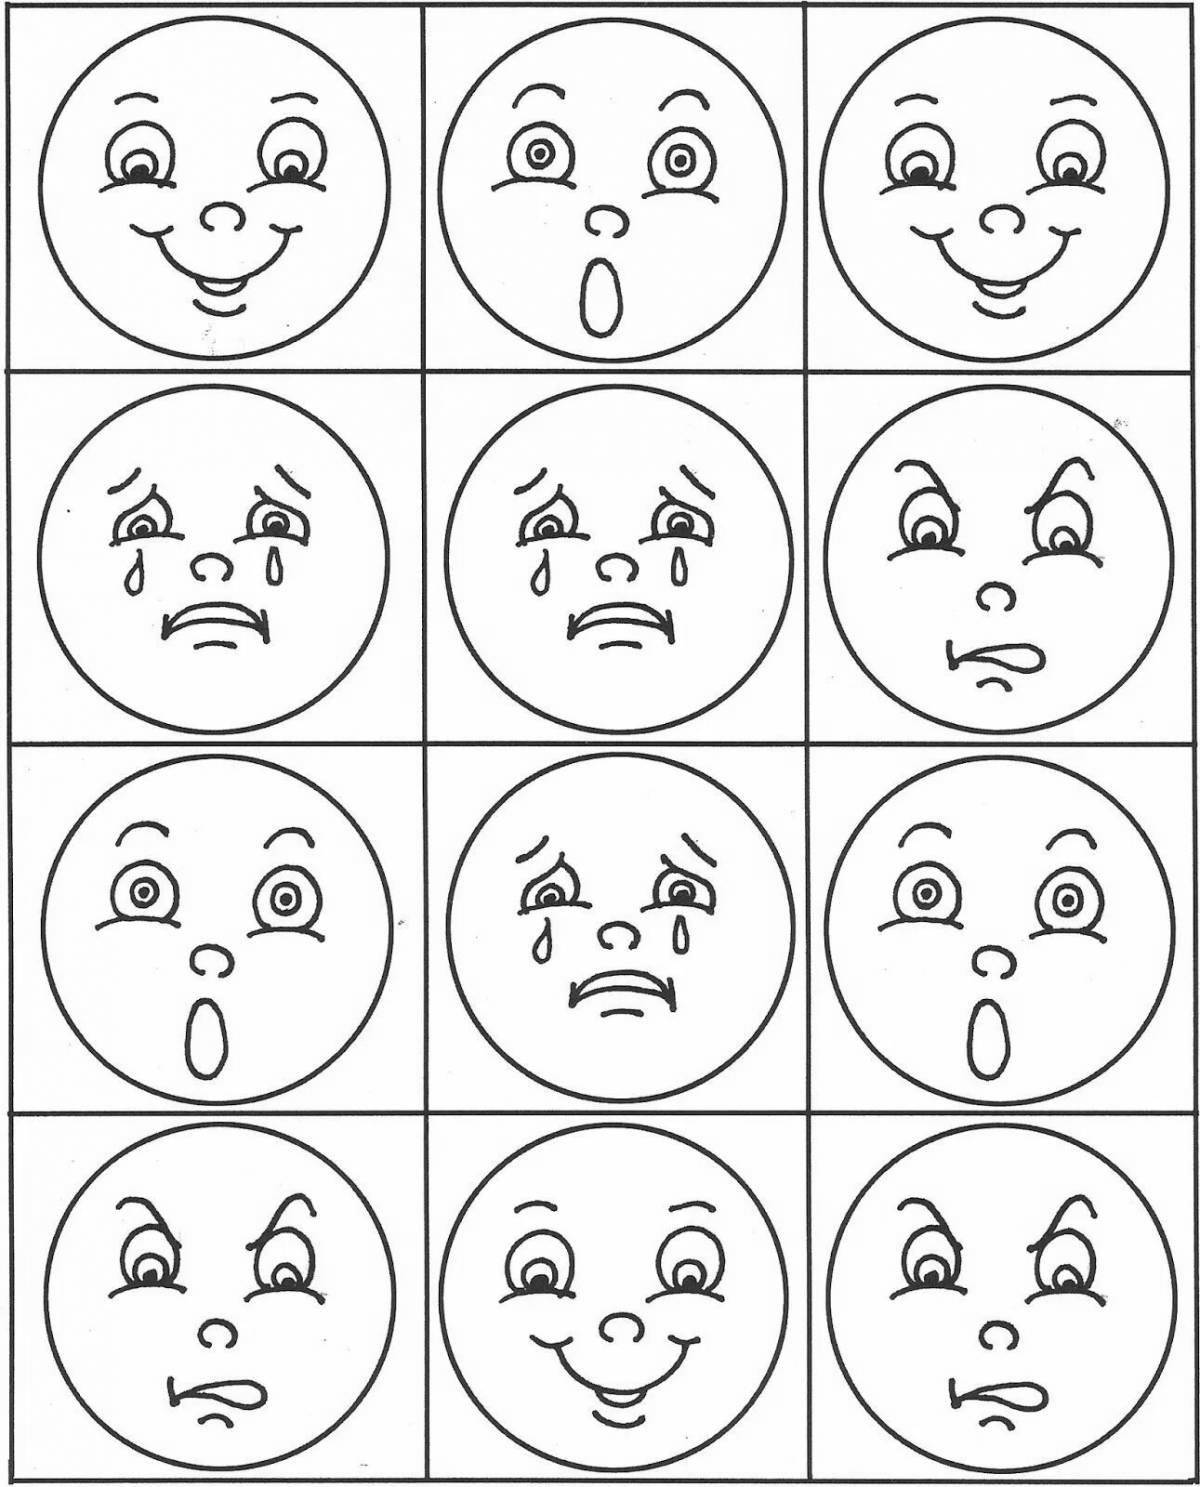 Vibrant emotion coloring pages for preschoolers